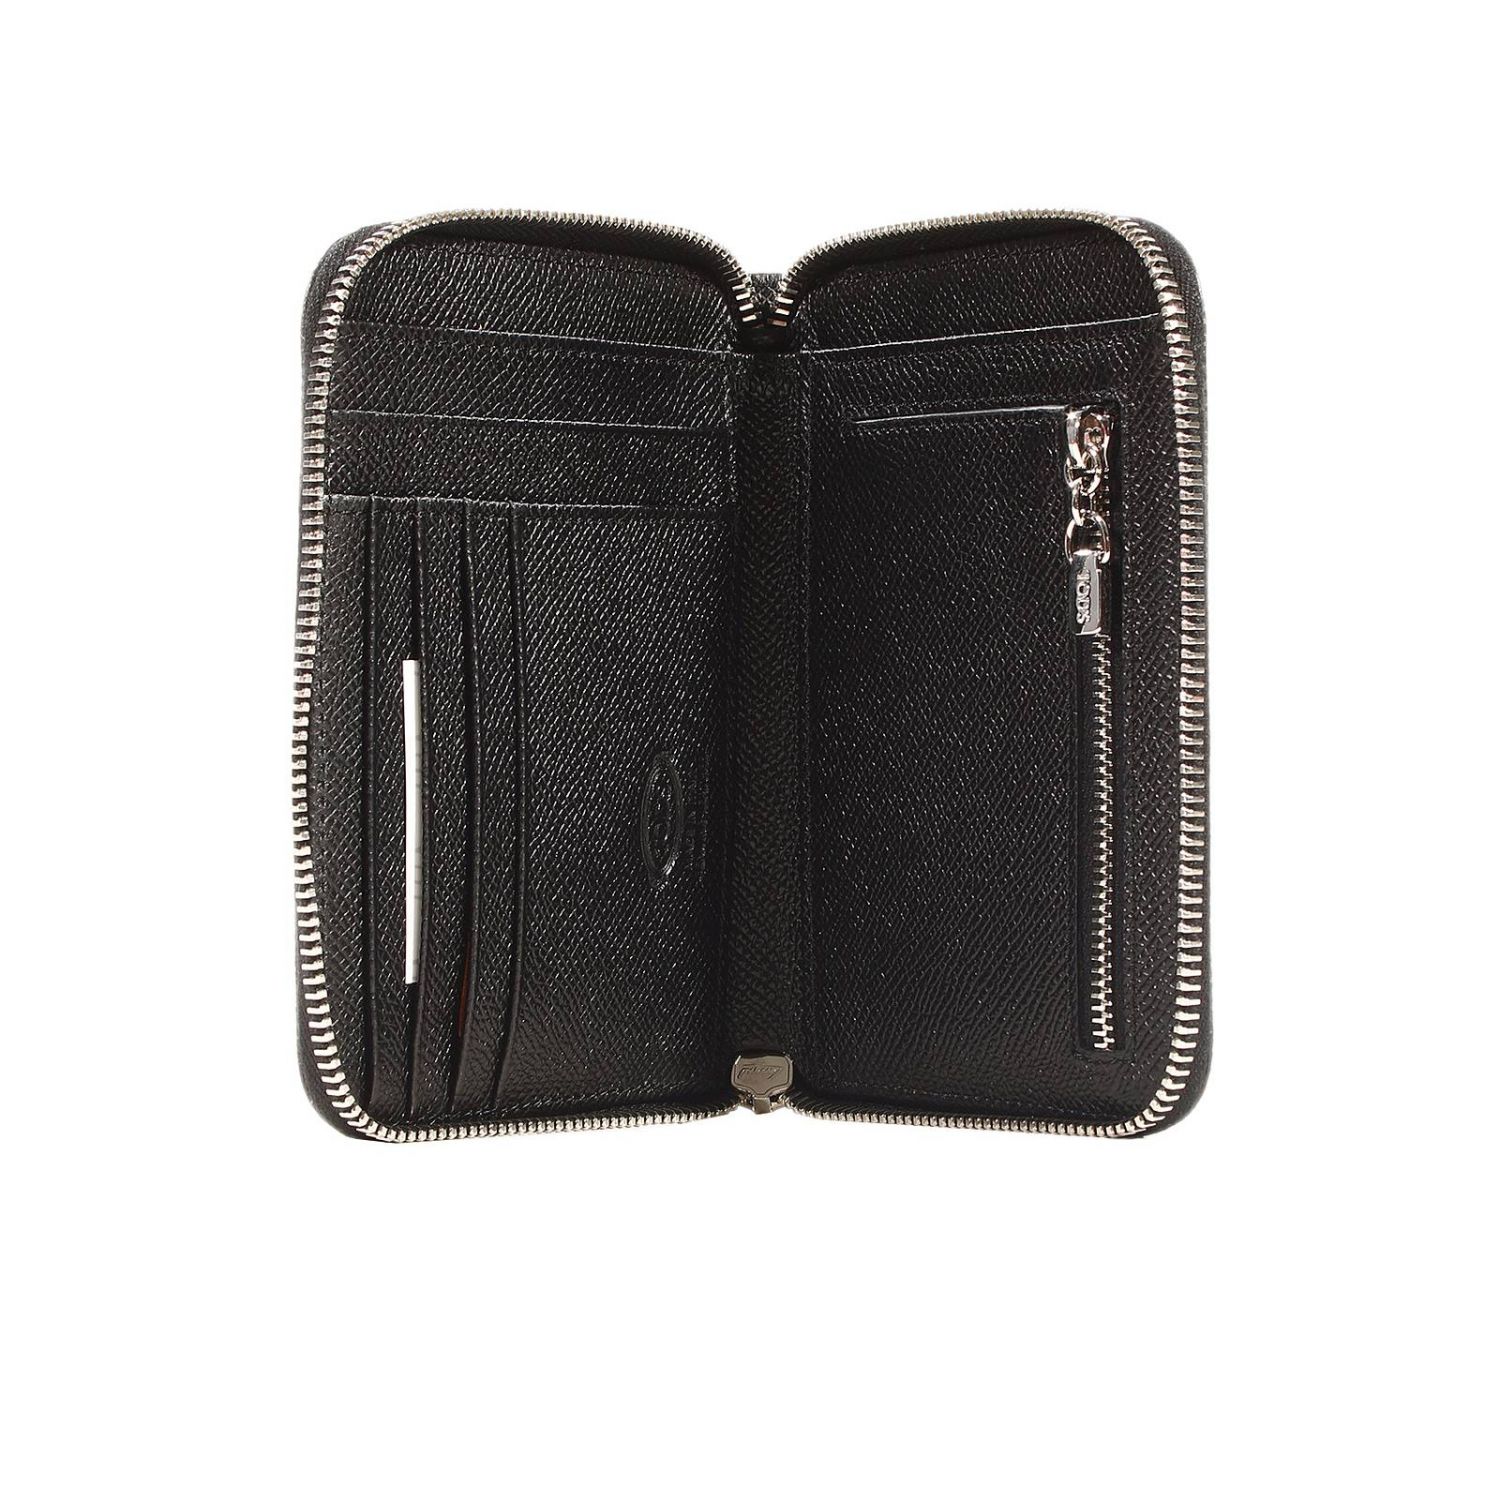 SQUARE ZIP AROUND IN LEATHER | Wallet Tods Women Black | Wallet Tods ...